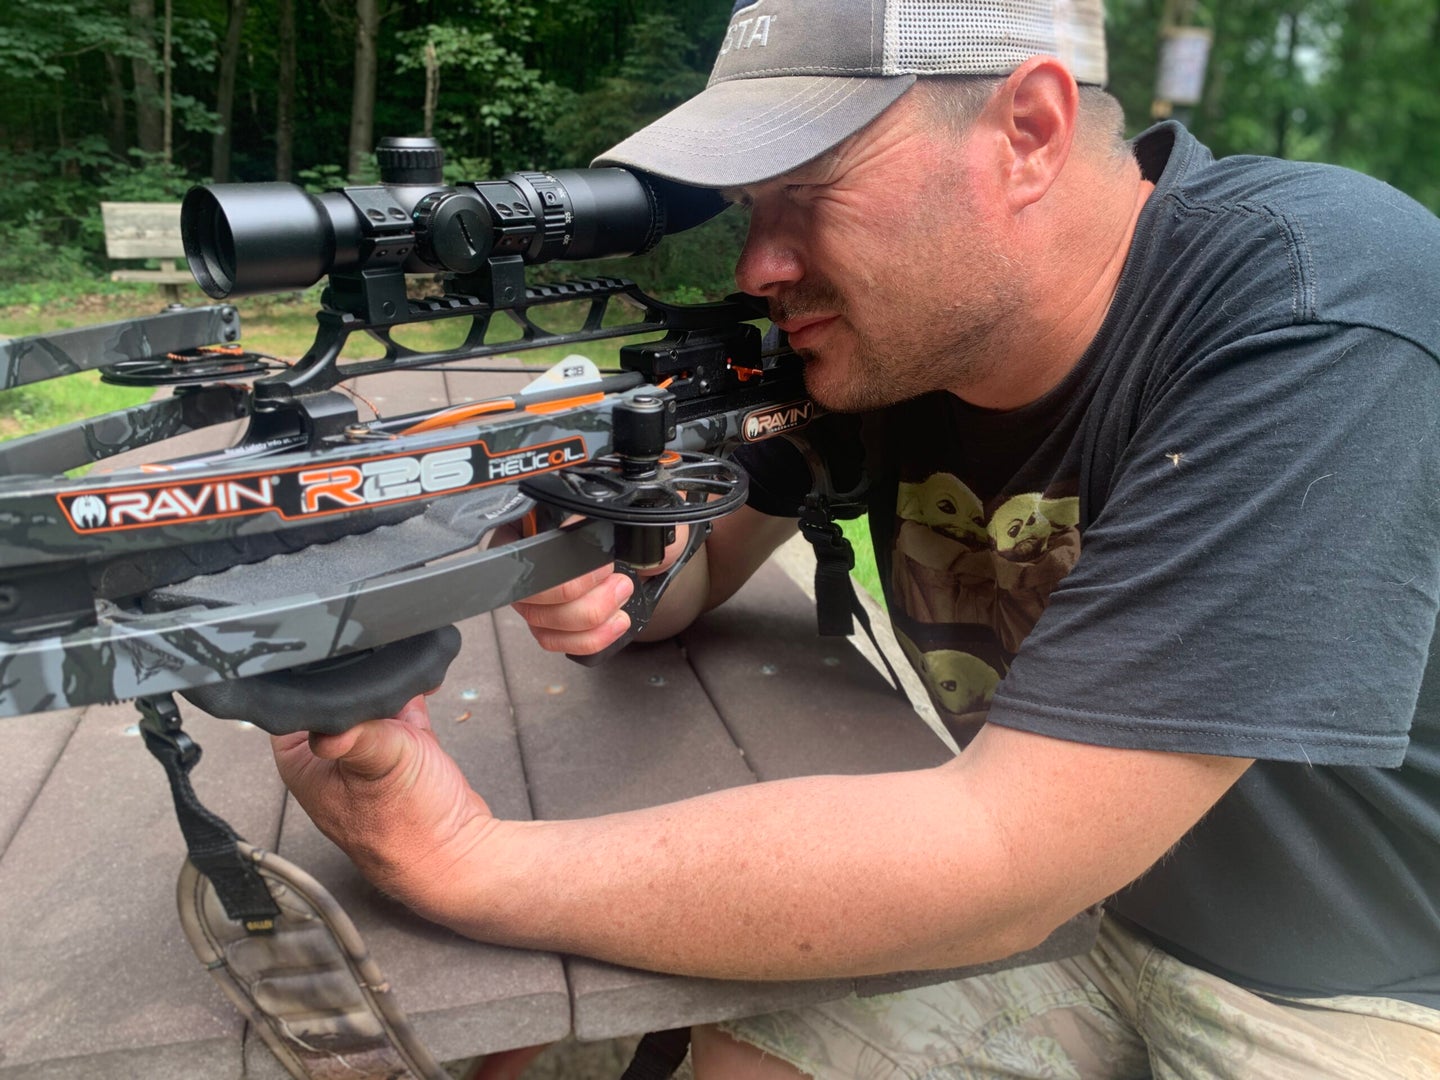 Crossbow shooter looks through a Ravin 450, a best crossbow scope for hunting.